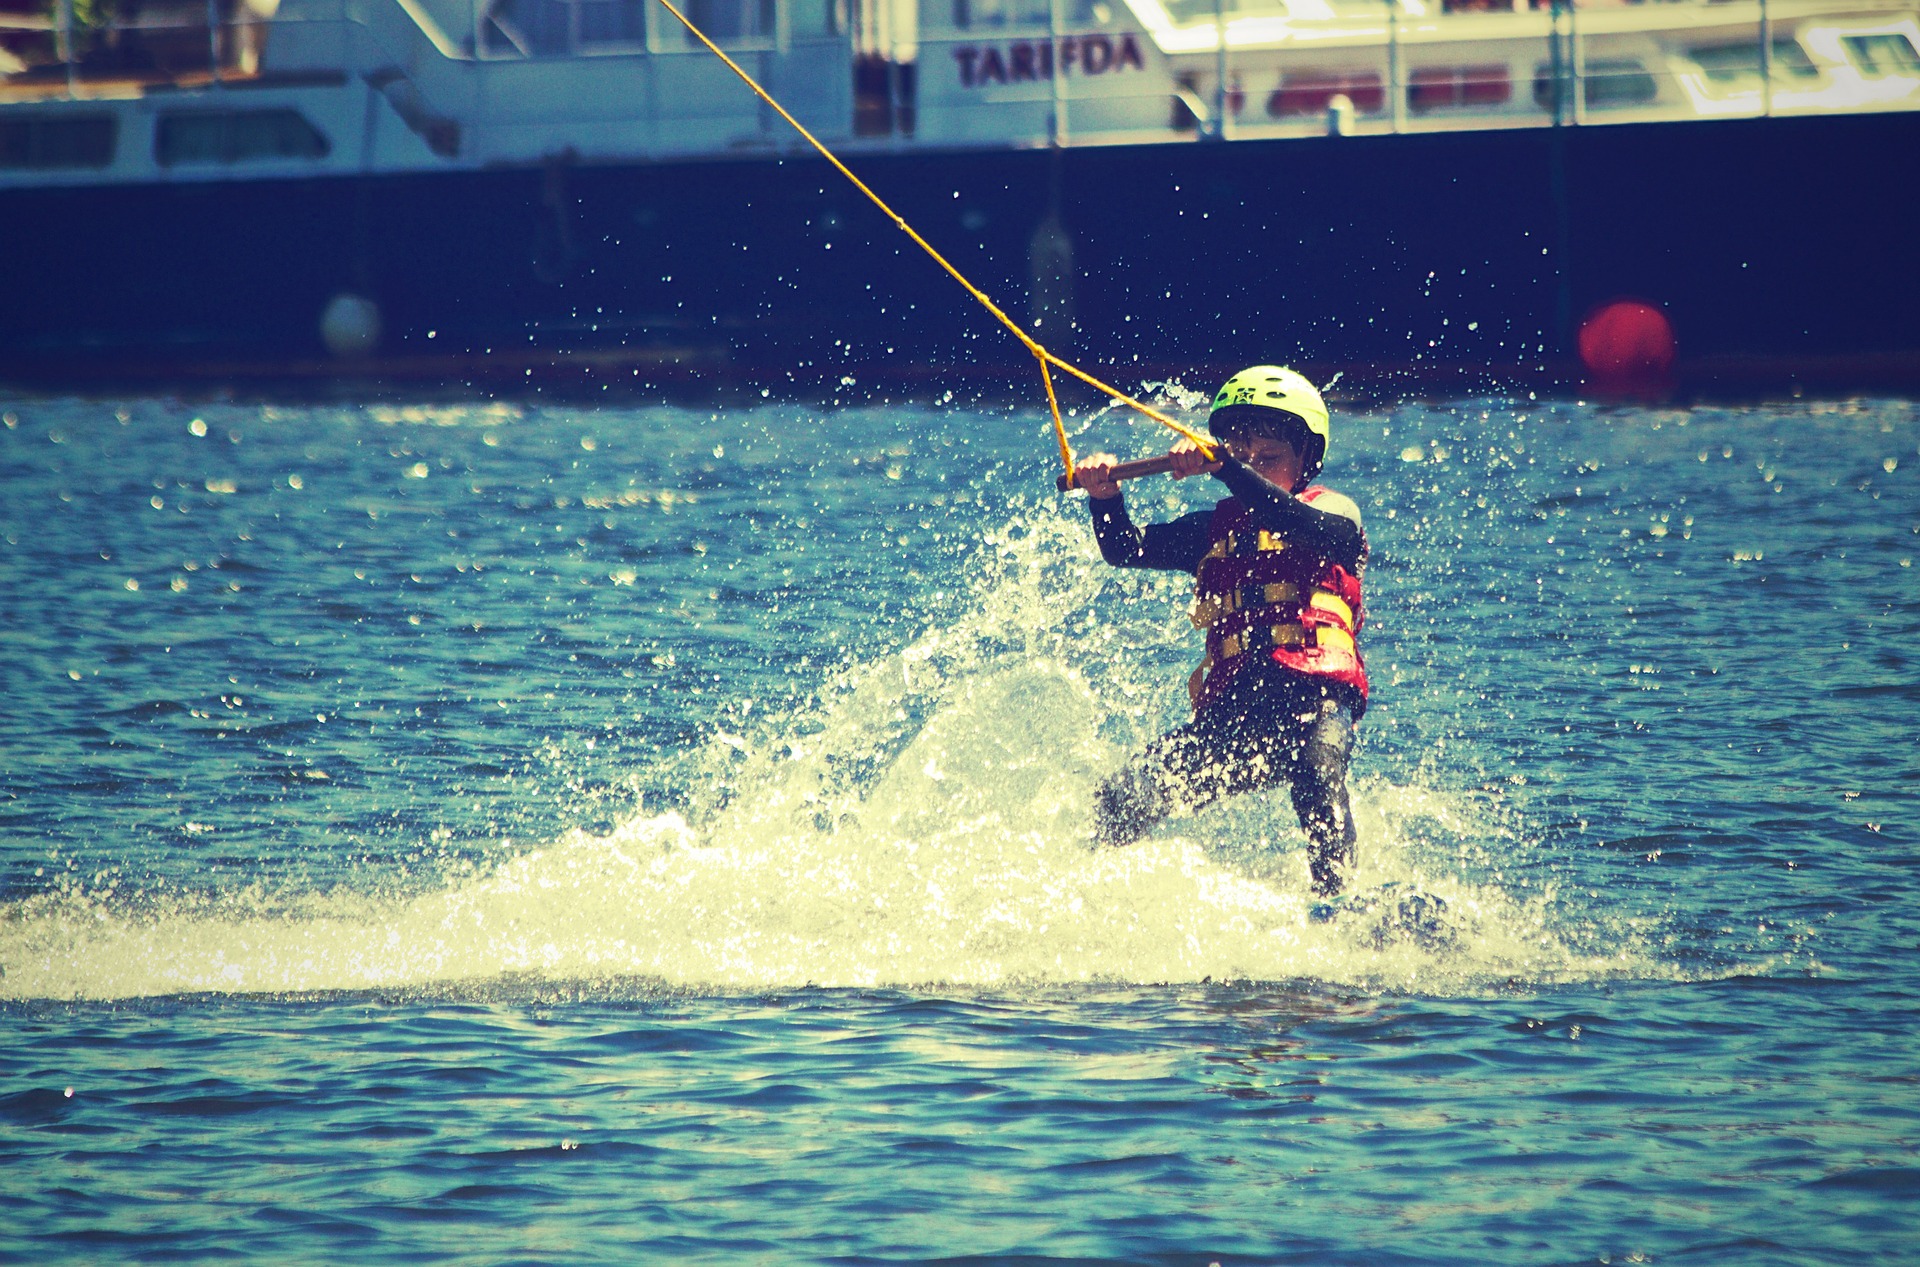 Kid having fun boating and participating in watersports